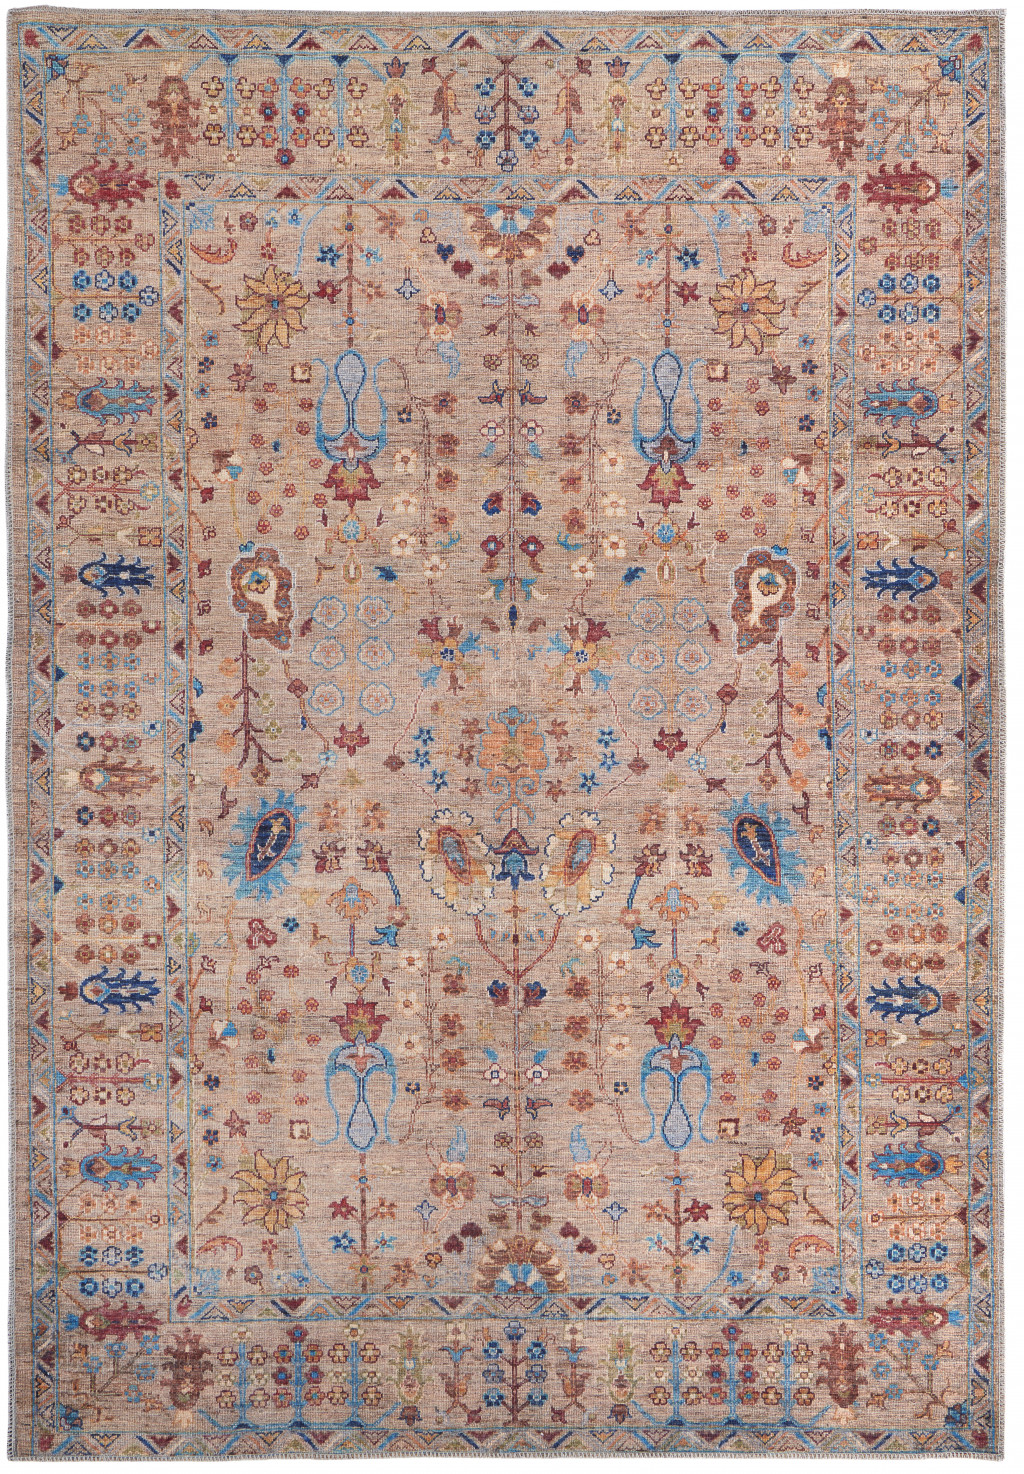 8' X 10' Tan Pink And Blue Floral Power Loom Area Rug-515163-1